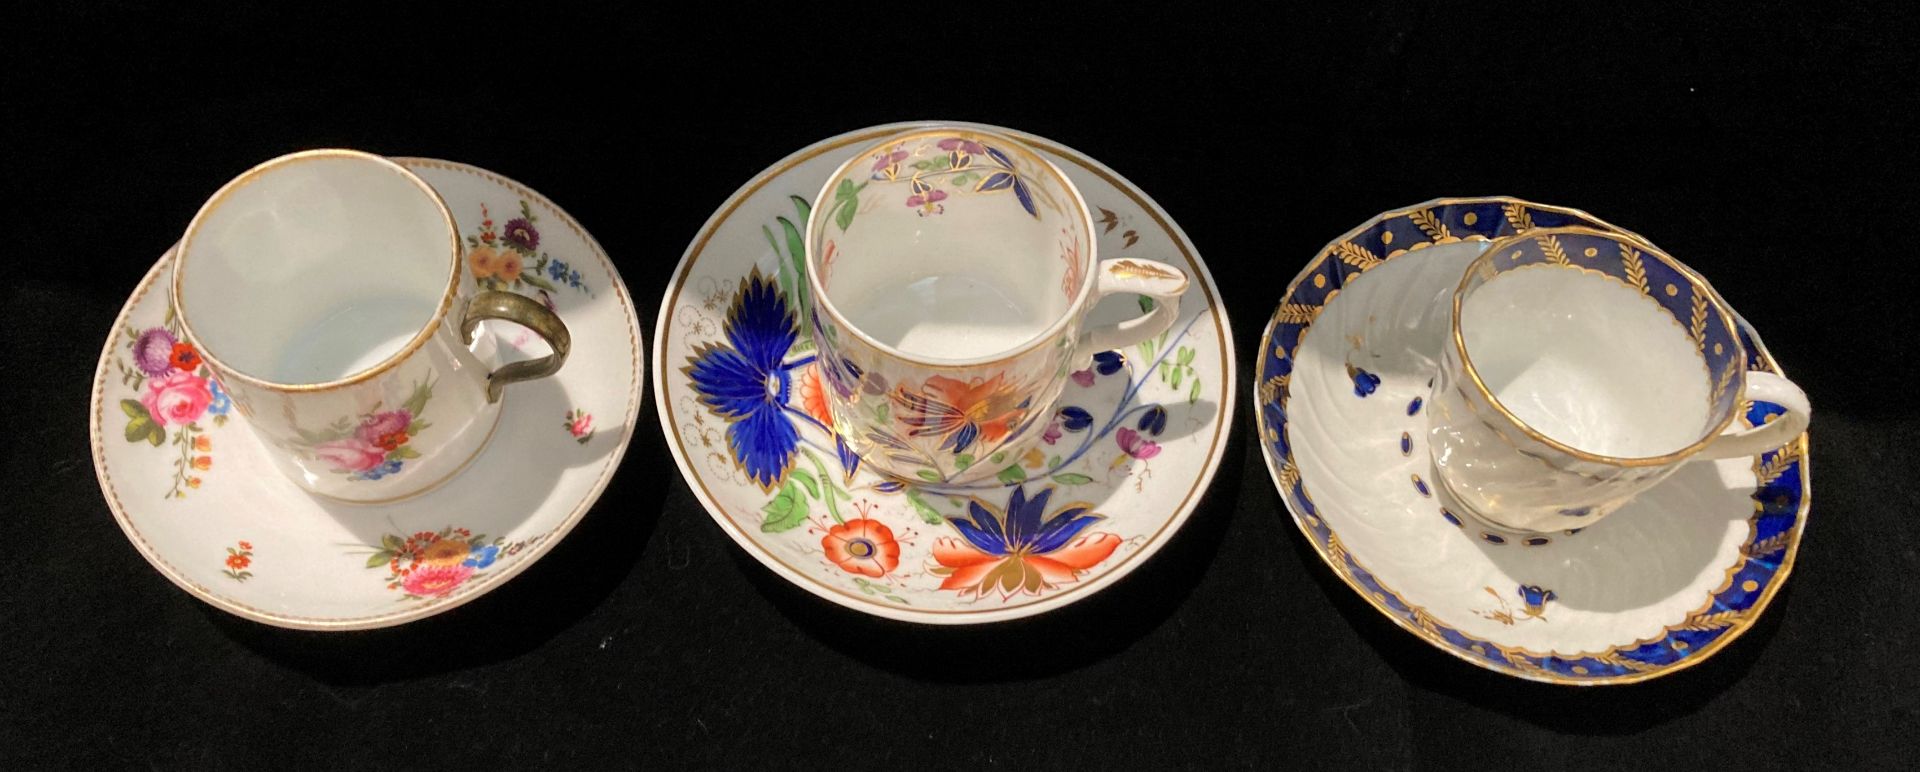 Three patterned cups and saucers - Image 2 of 3